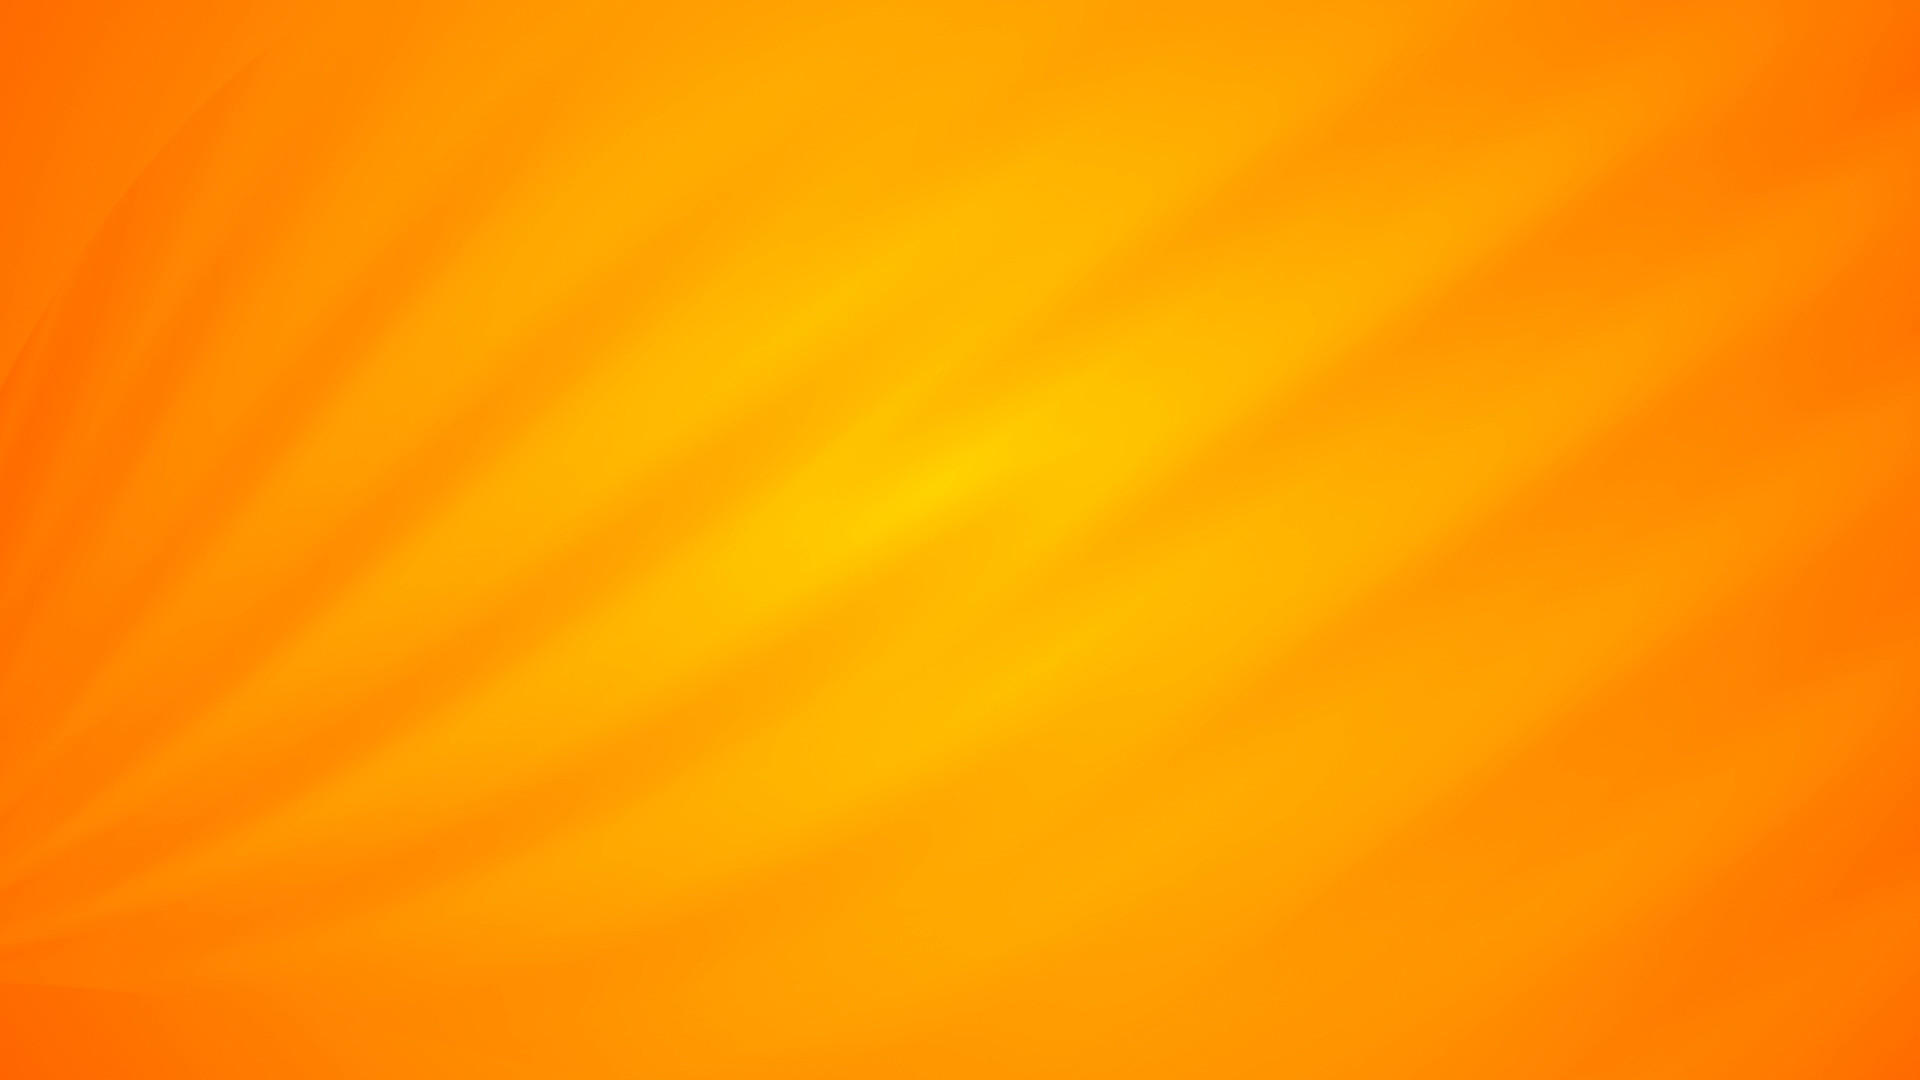 1920x1080 orange background images Abstract Backgrounds – Orange Overhead Productions